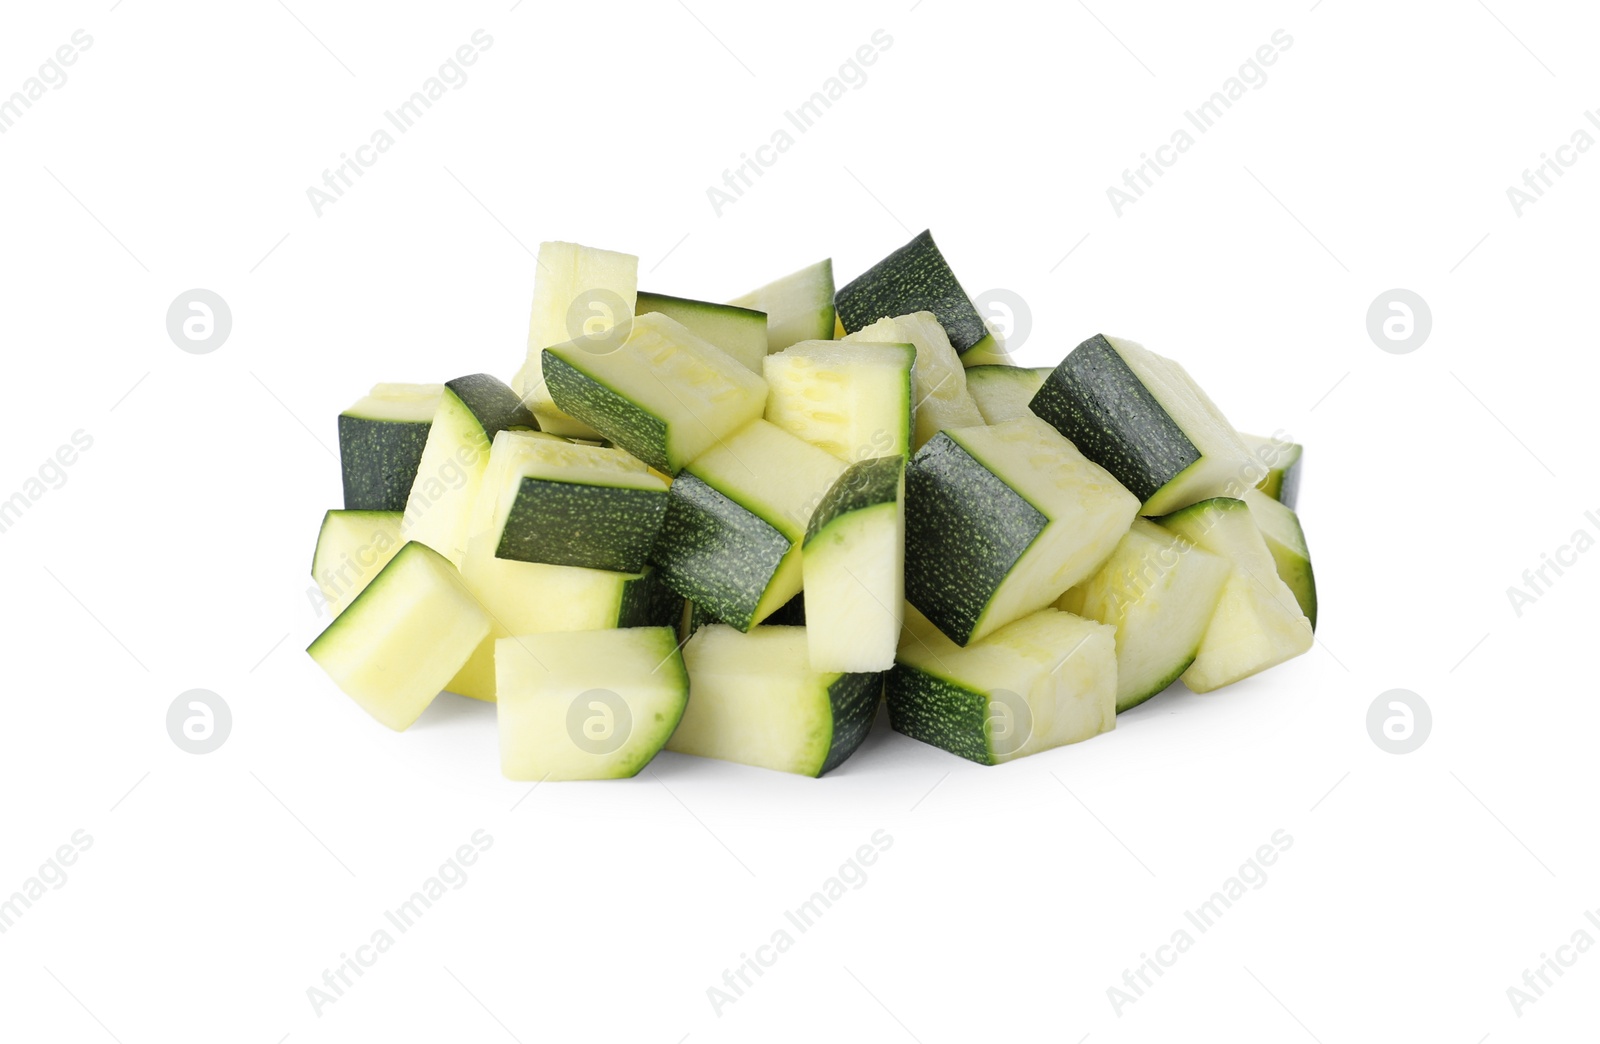 Photo of Pieces of ripe zucchini on white background